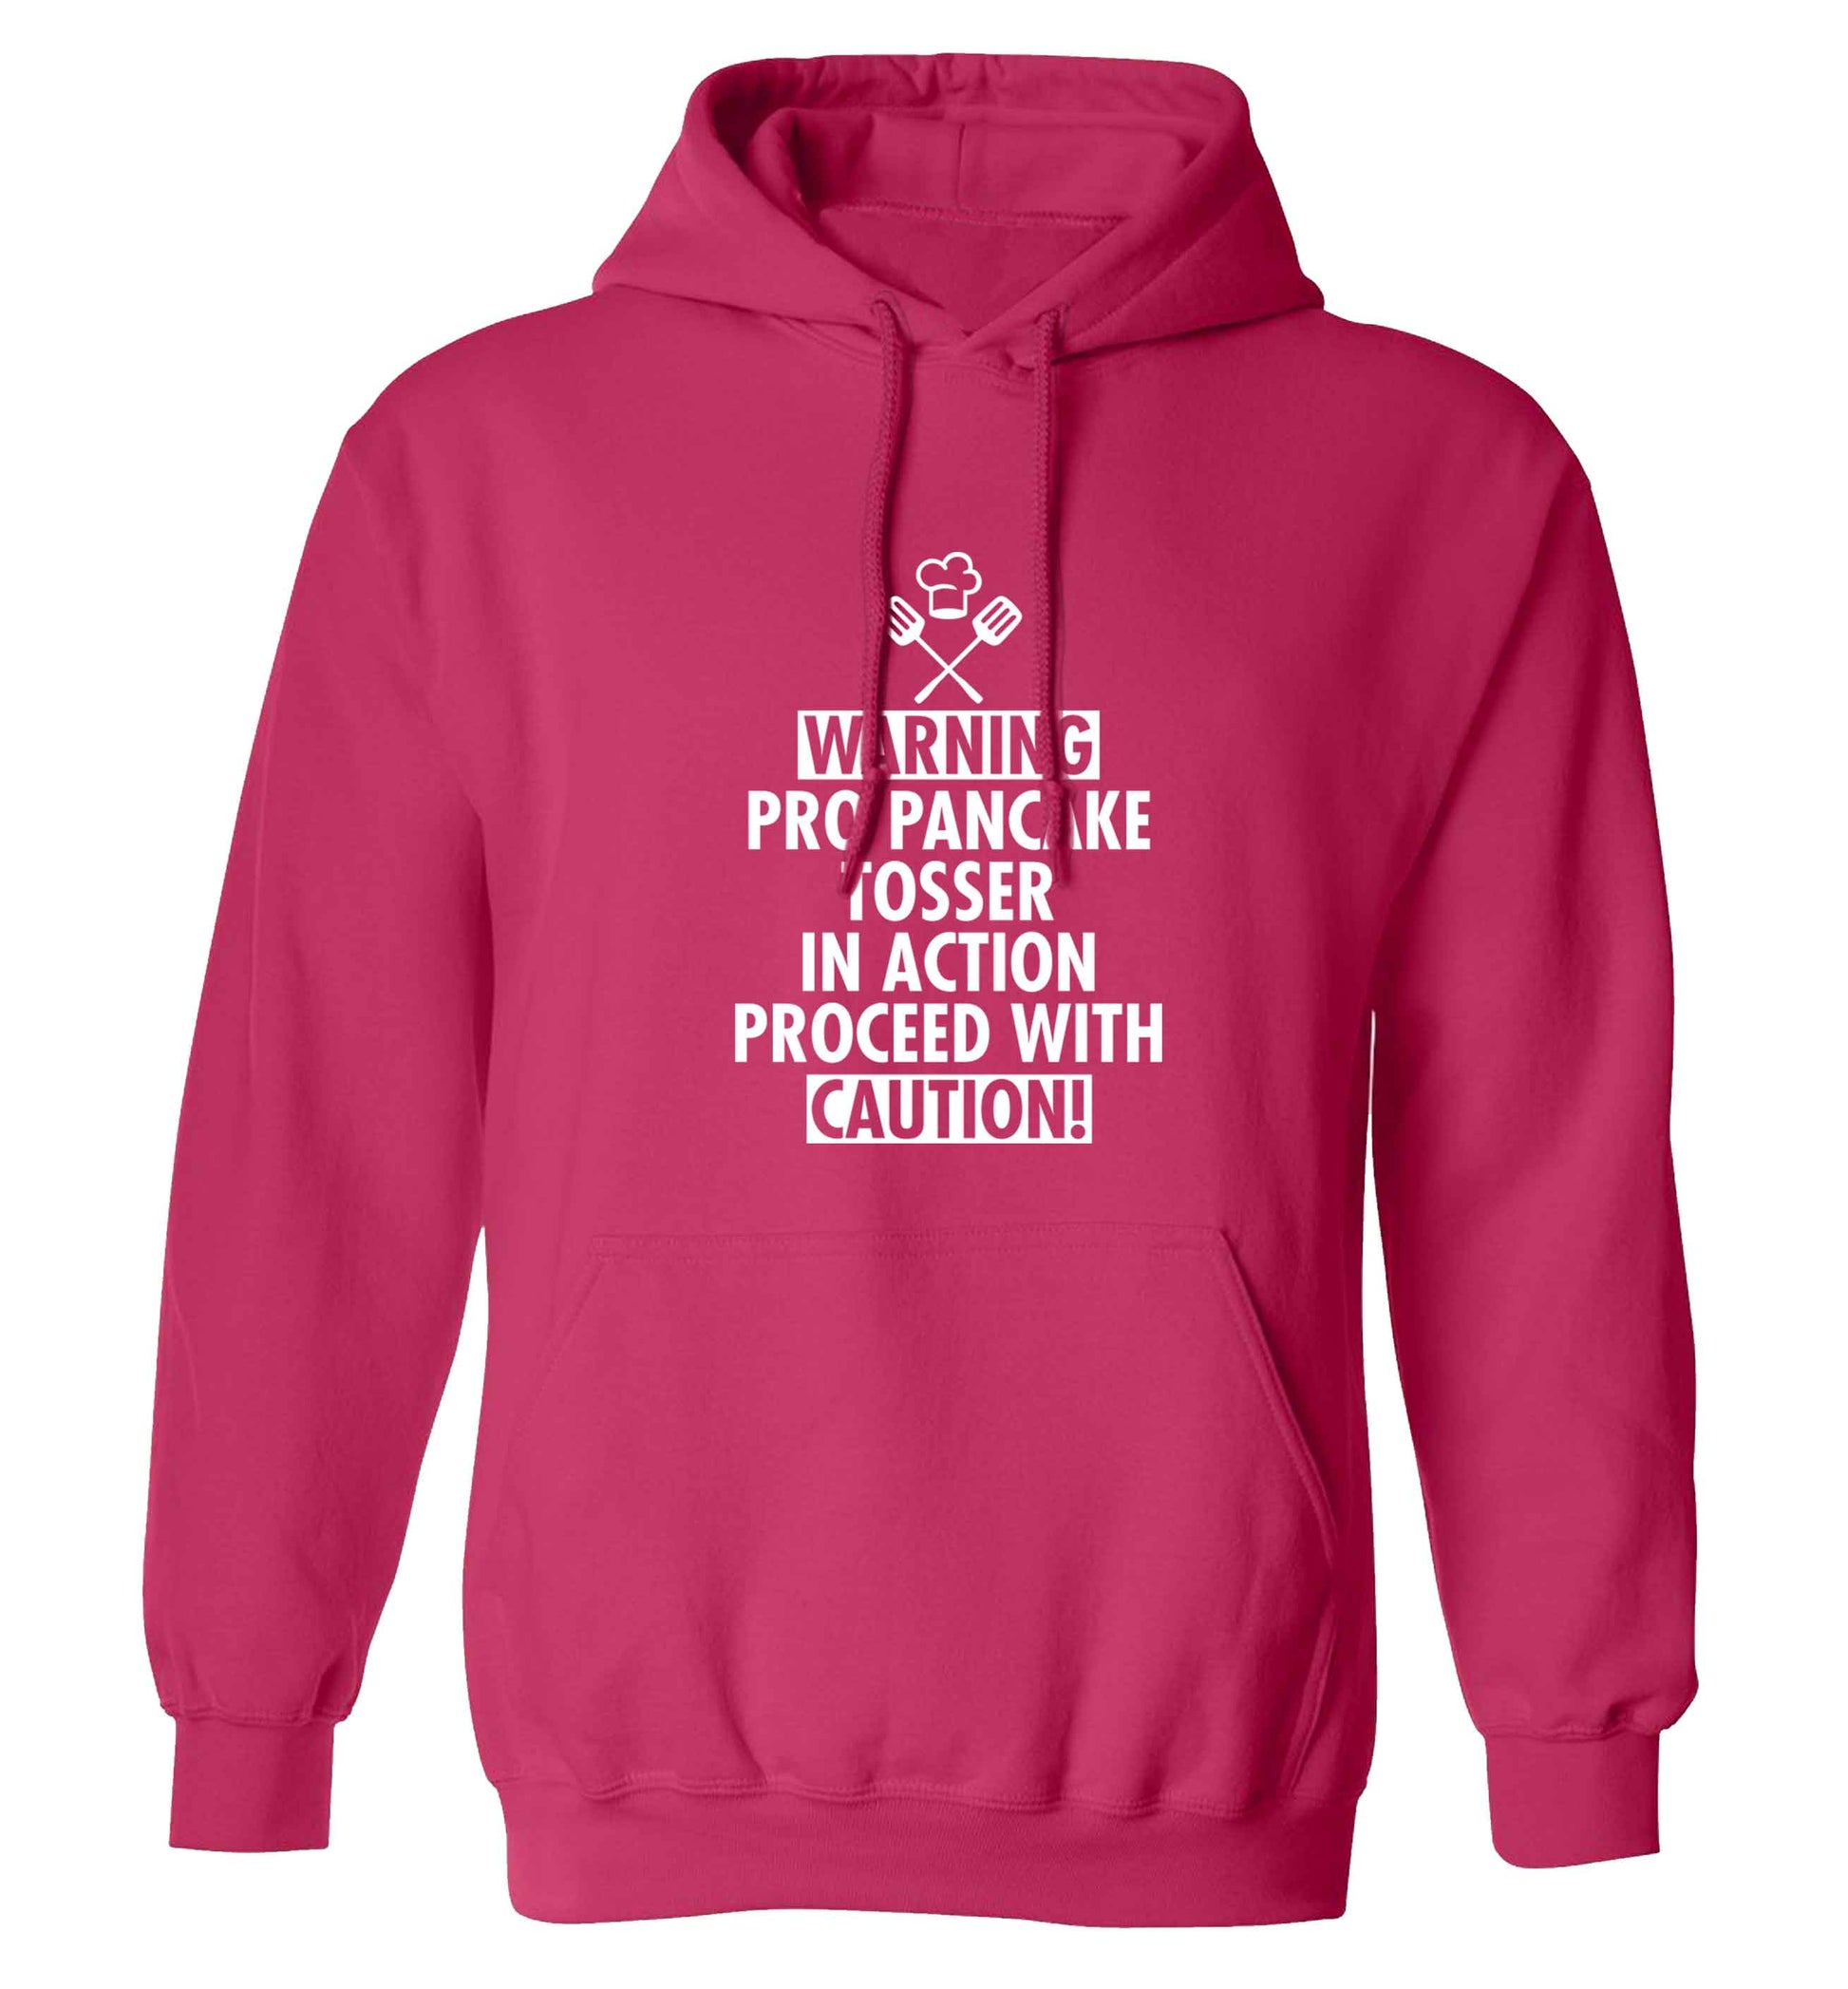 Warning pro pancake tosser in action proceed with caution adults unisex pink hoodie 2XL